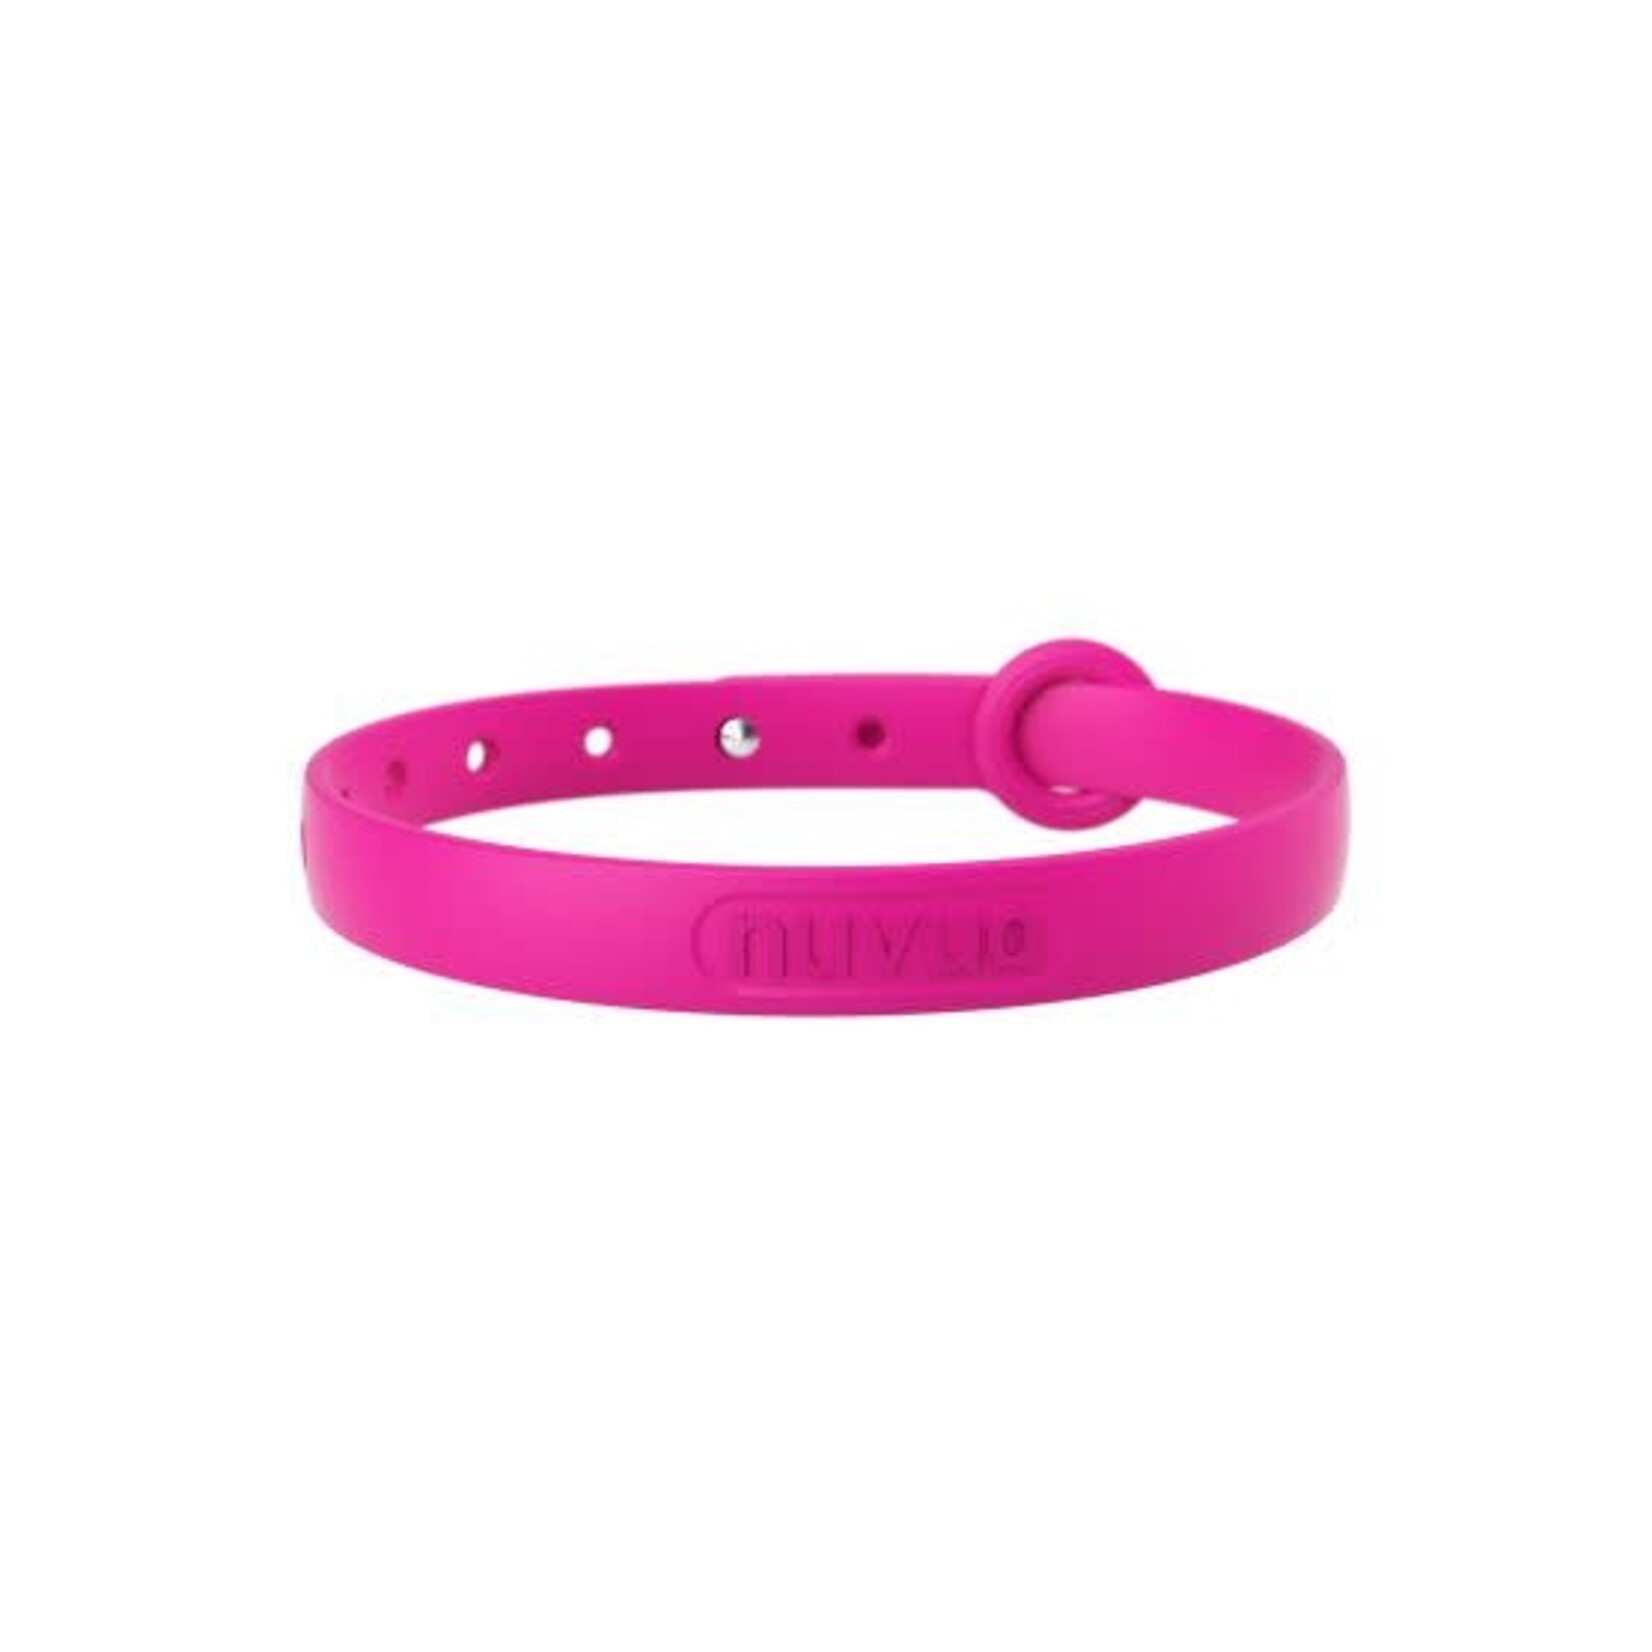 NUVUQ NUVUQ CHAT COLLIER ELASTOMERE FRAMBOISE 7.5-10.5''